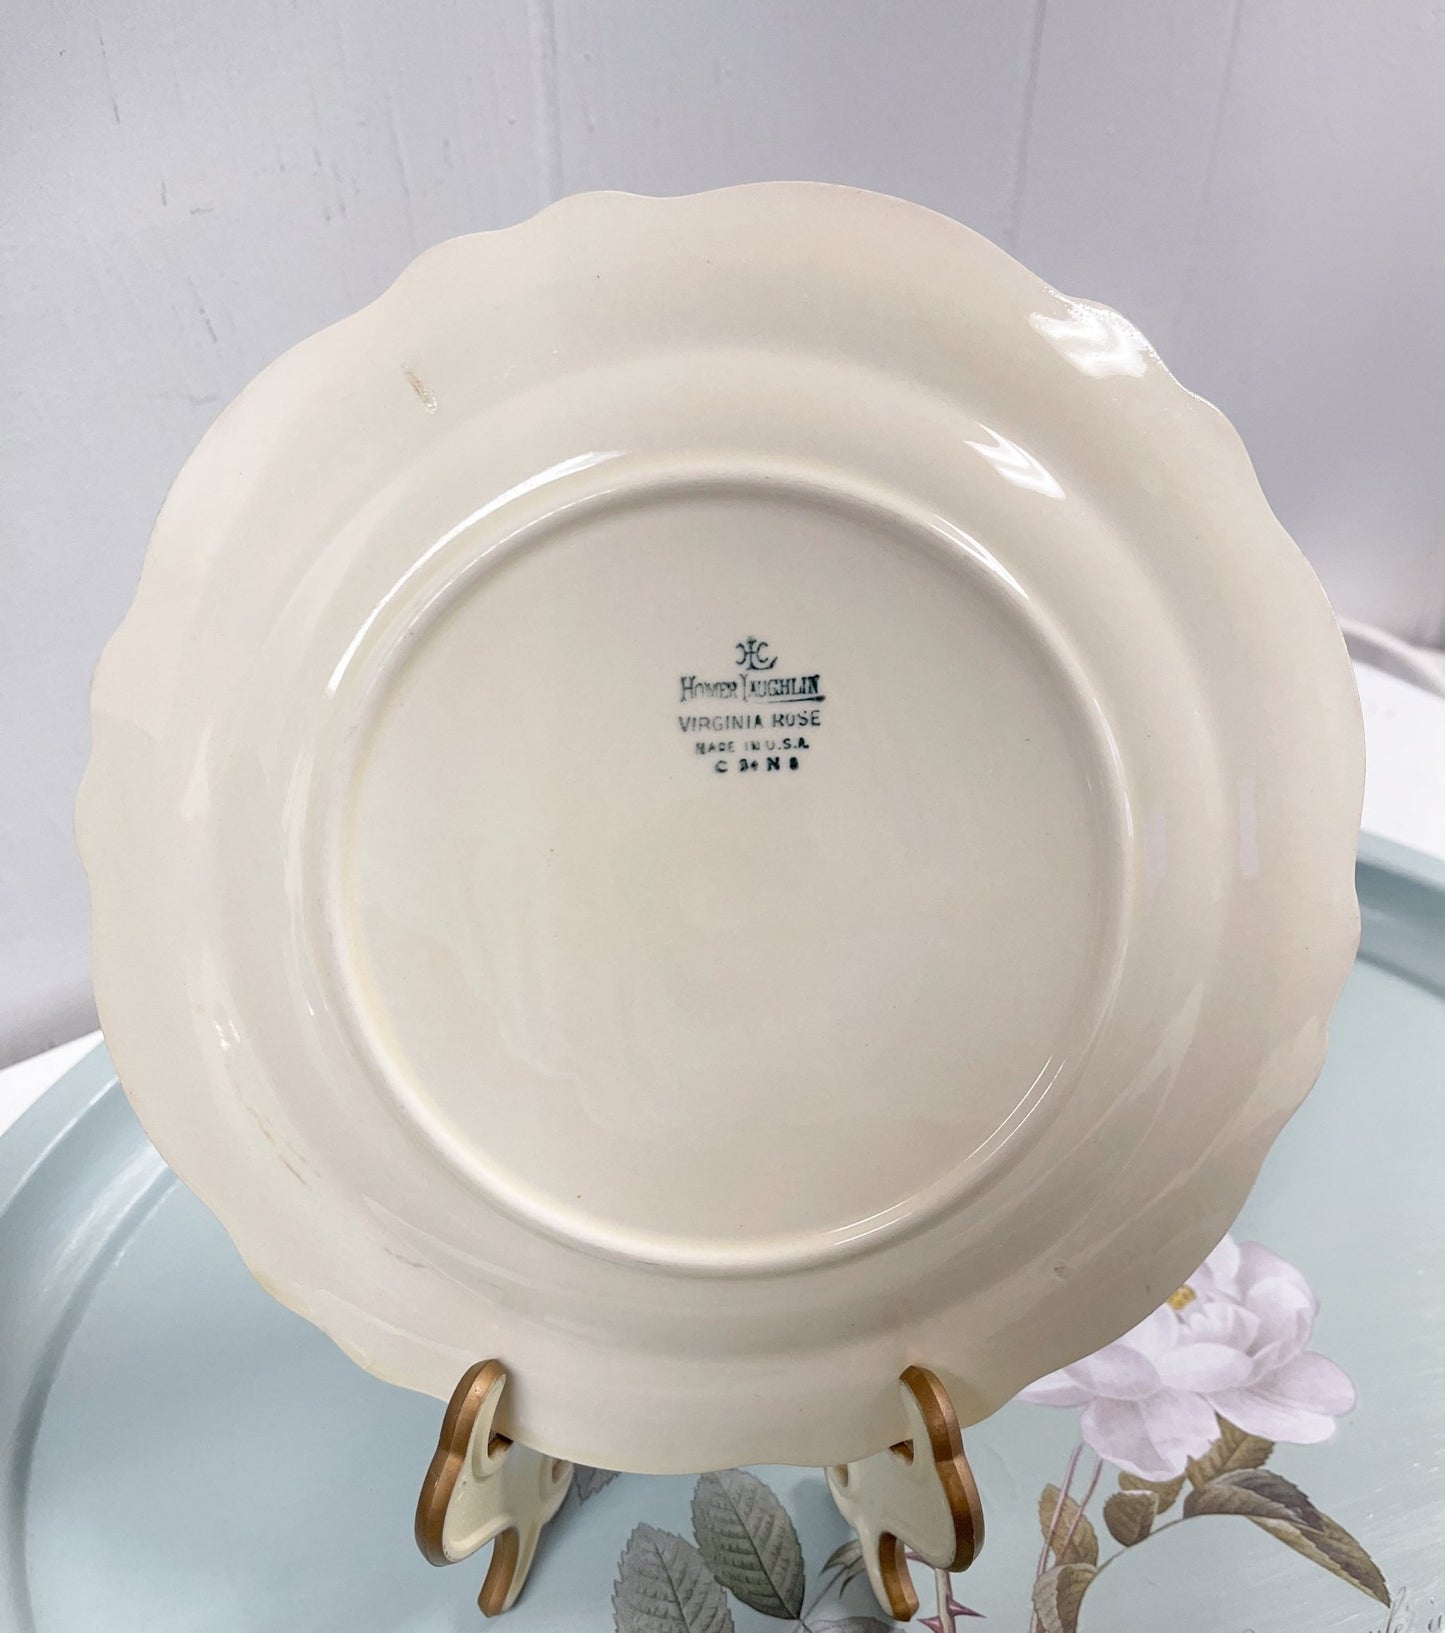 Silver Rose Patrician Salad Plate by Homer Laughlin-Homer Laughlin-Salad Plate-Stockton Farm